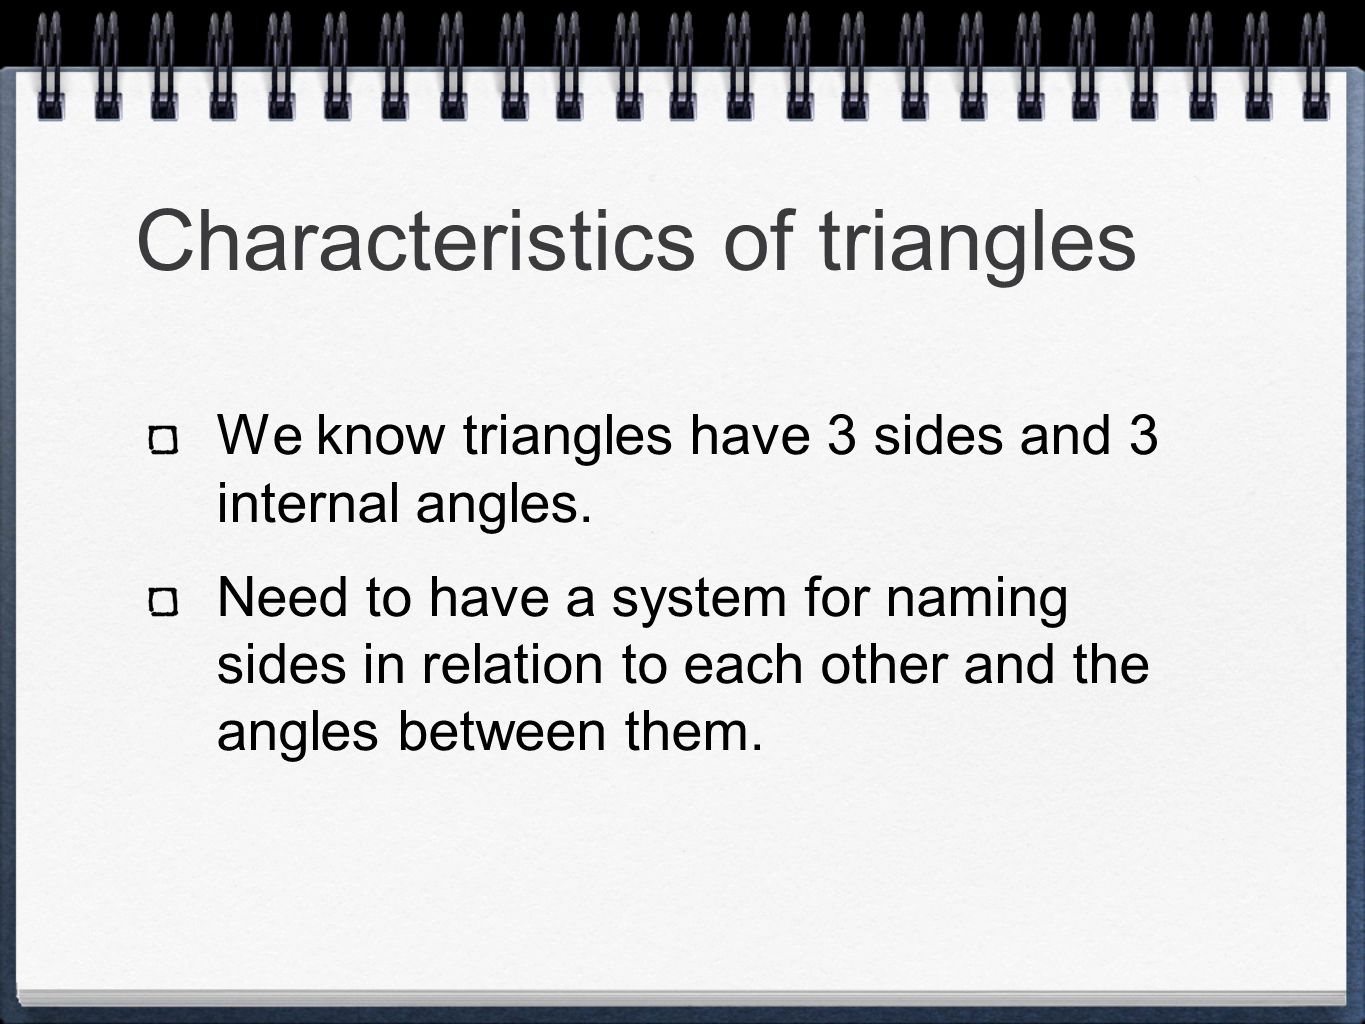 Characteristics of triangles We know triangles have 3 sides and 3 internal angles.